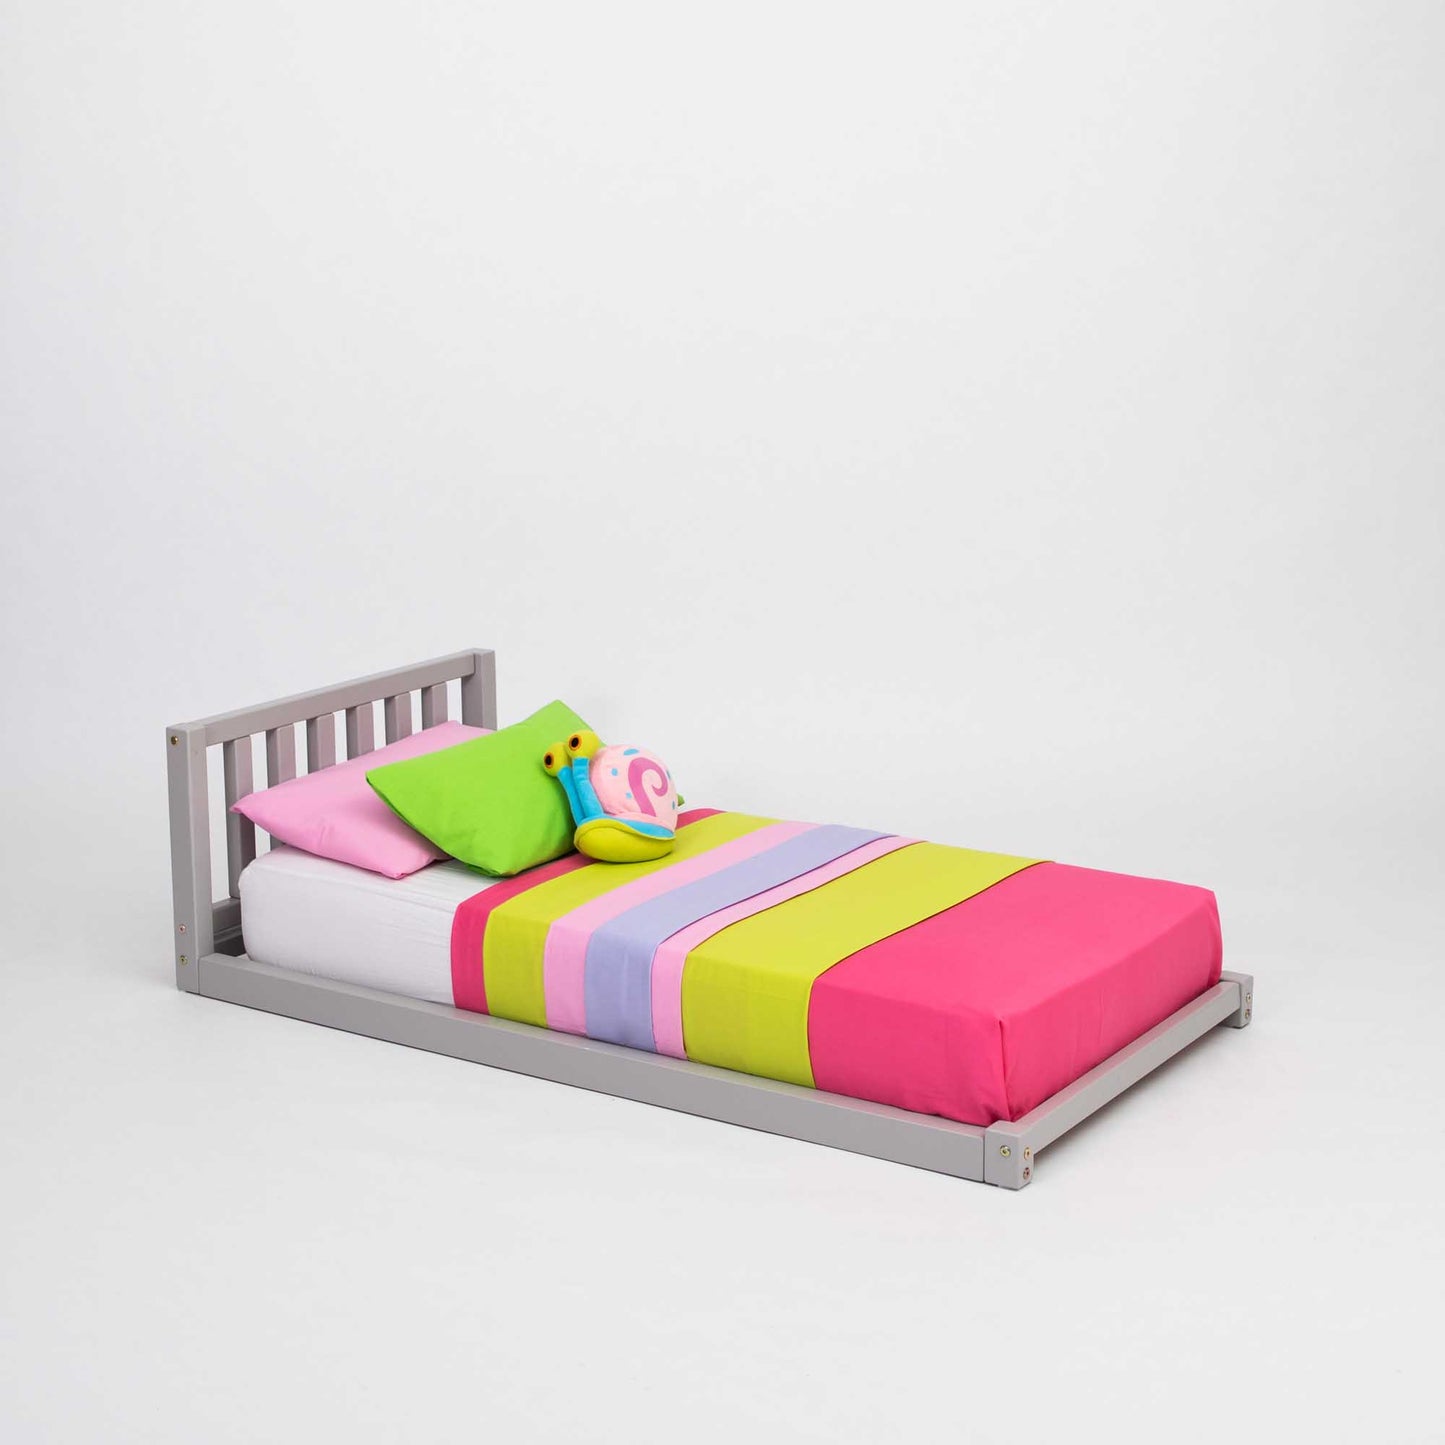 A colorful Sweet Home From Wood toddler bed with a headboard, sheets, and pillows.